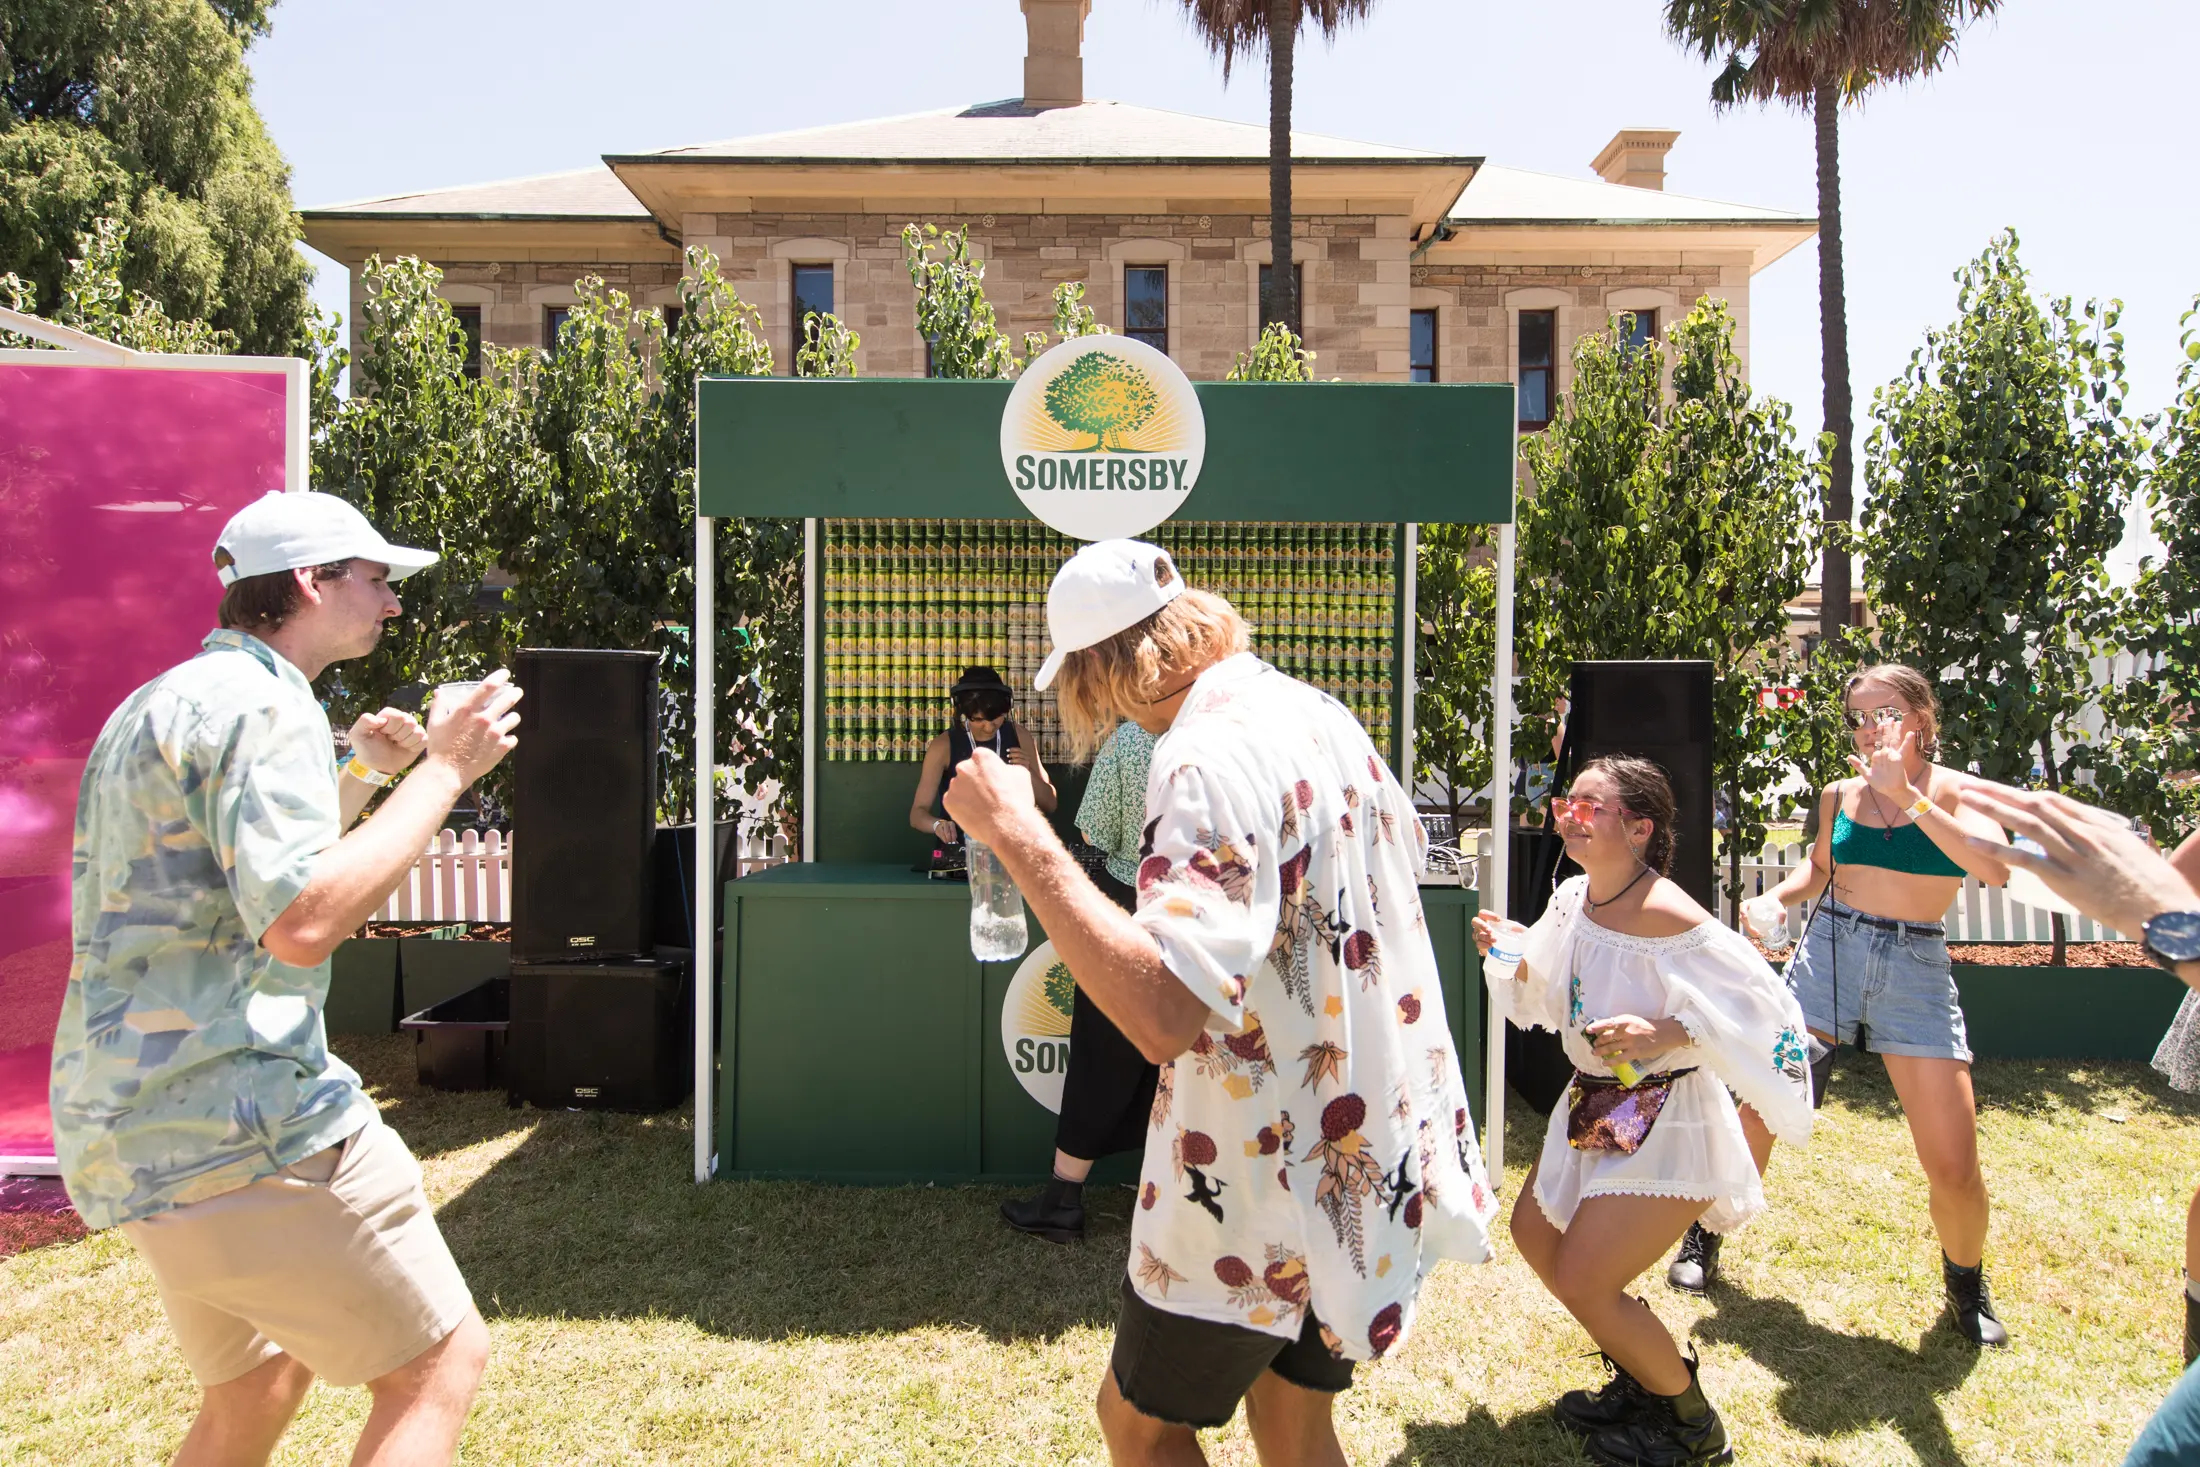 Laneway Festival Somersby Wondermaze  - brand activation, event management and production - SCA and Callan Park, Sydney, Australia